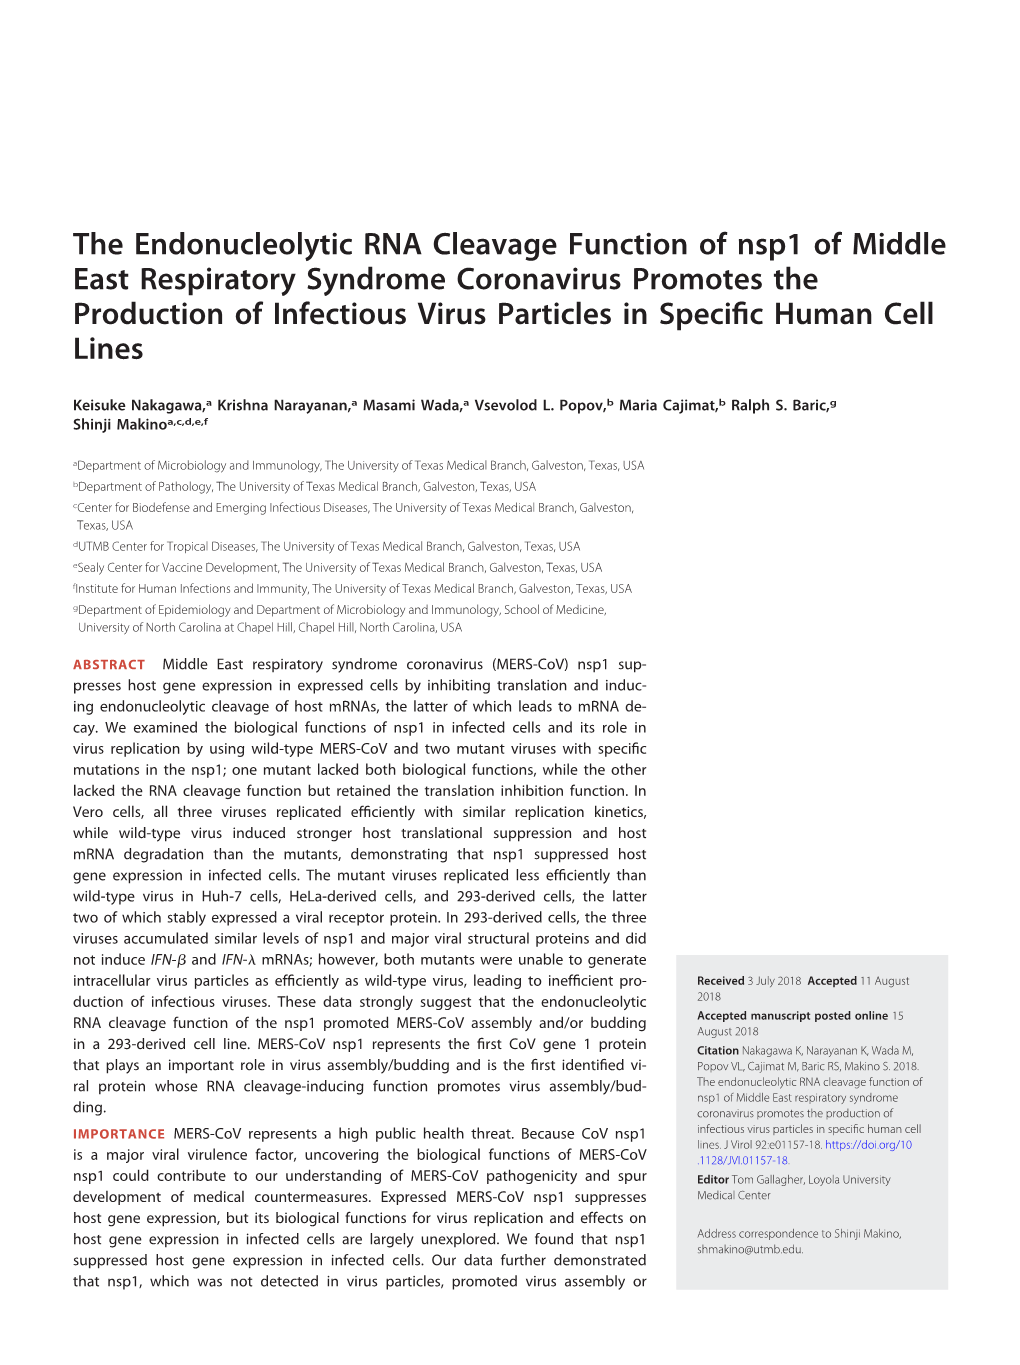 The Endonucleolytic RNA Cleavage Function of Nsp1 of Middle East